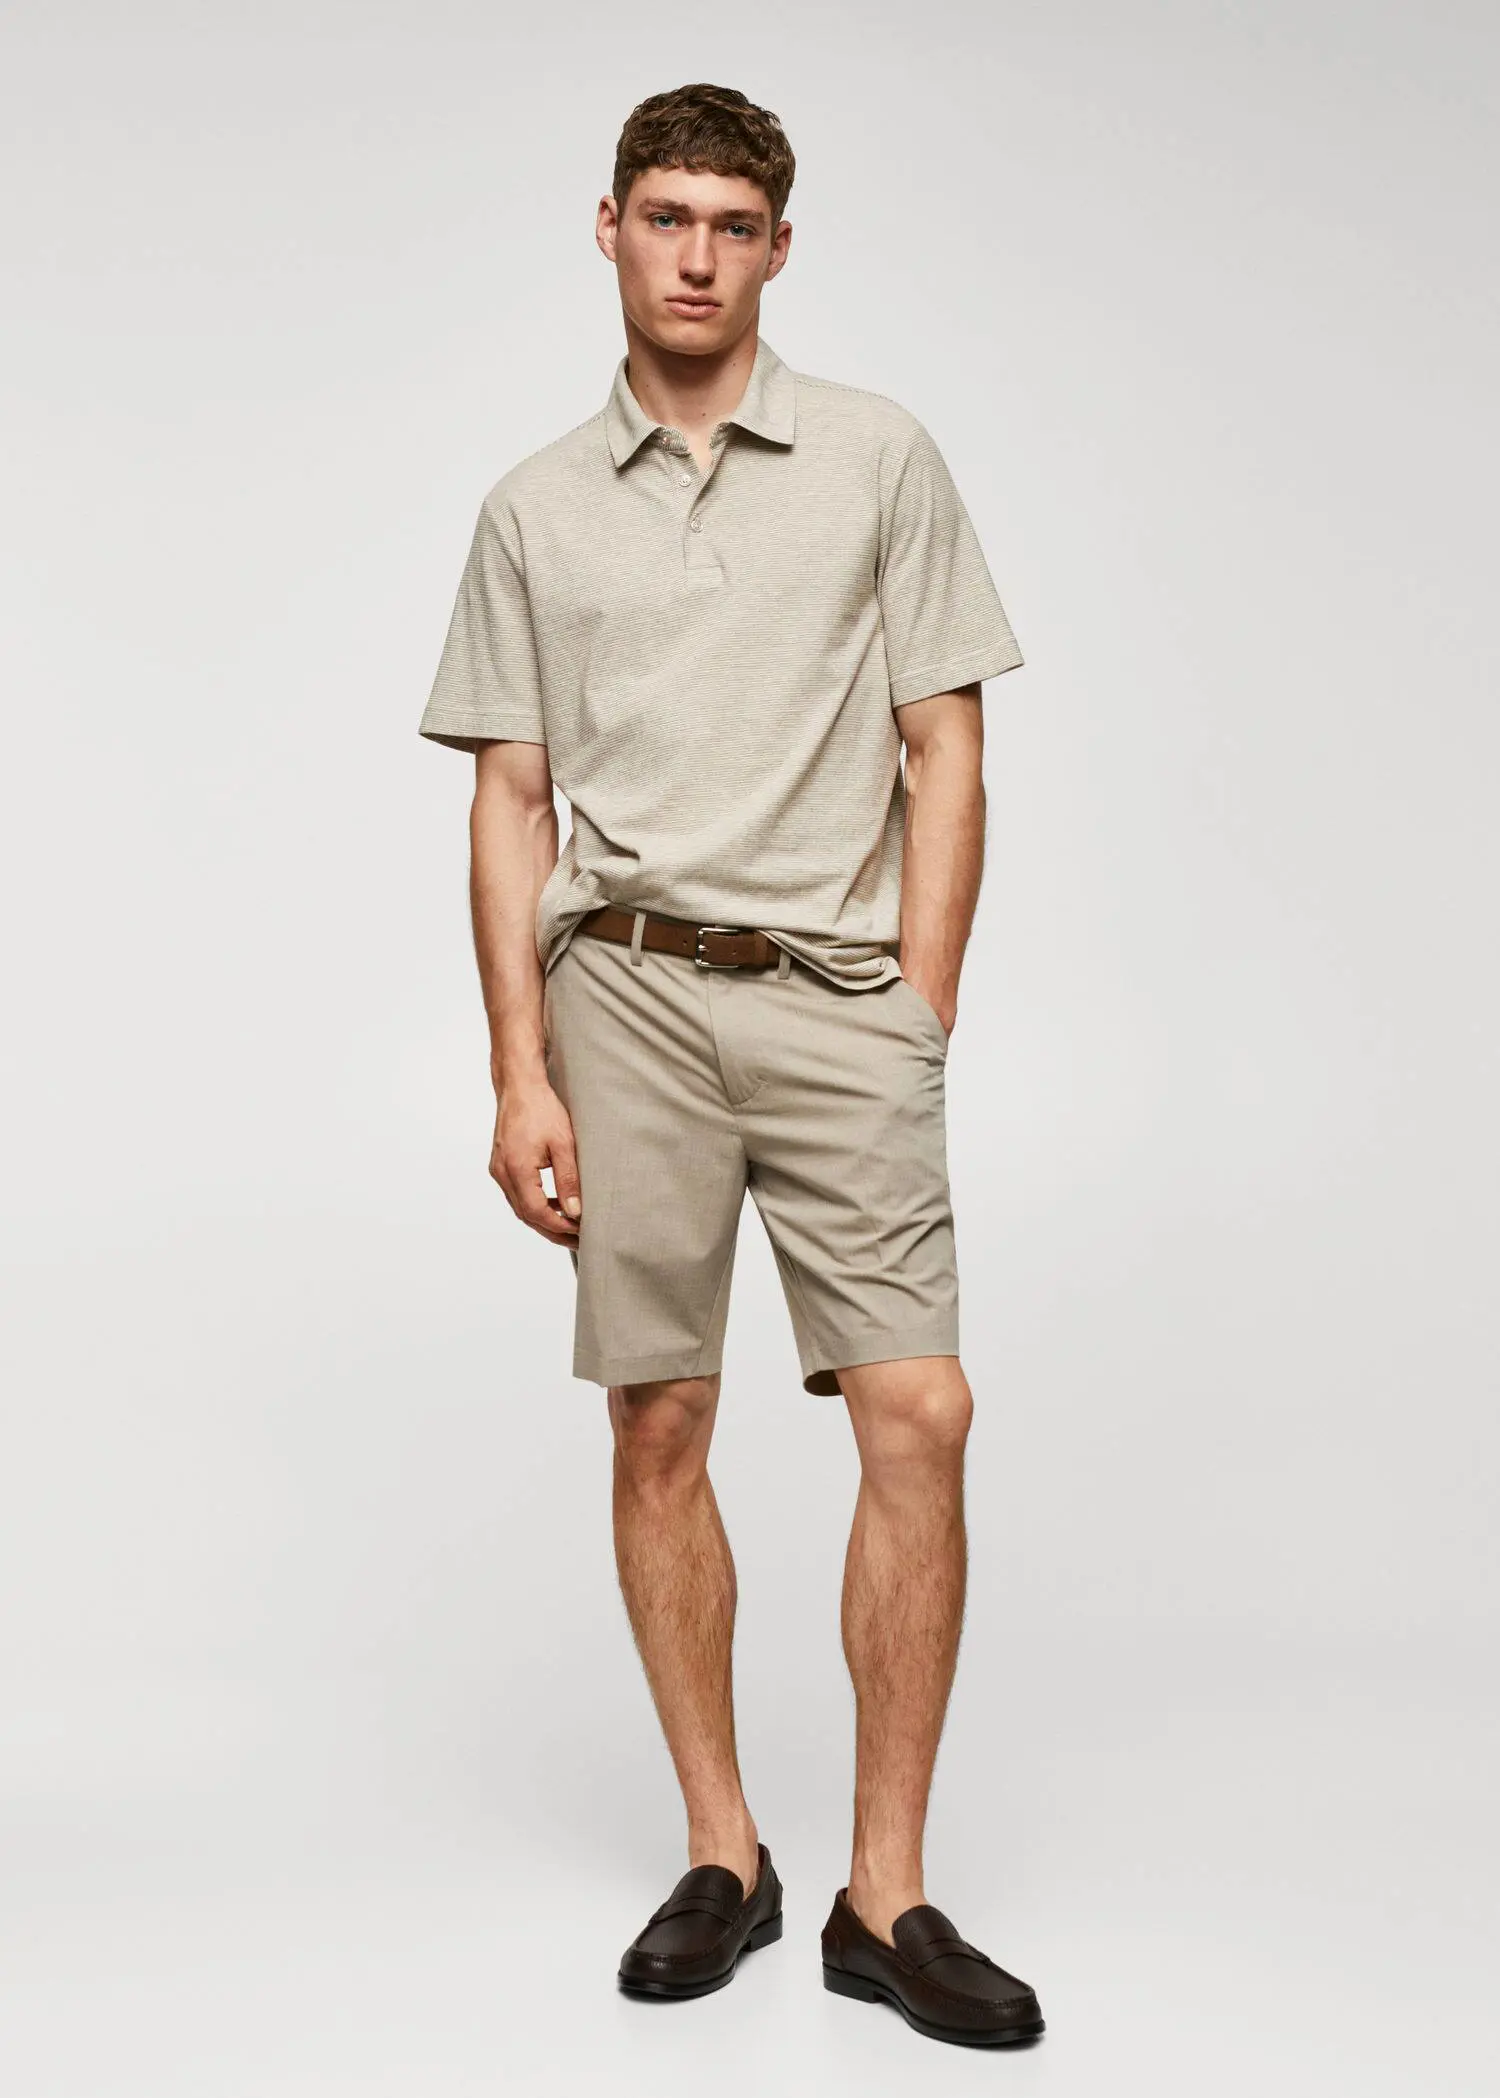 Mango 100% cotton polo shirt with striped structure. a man in a tan shirt and tan shorts. 